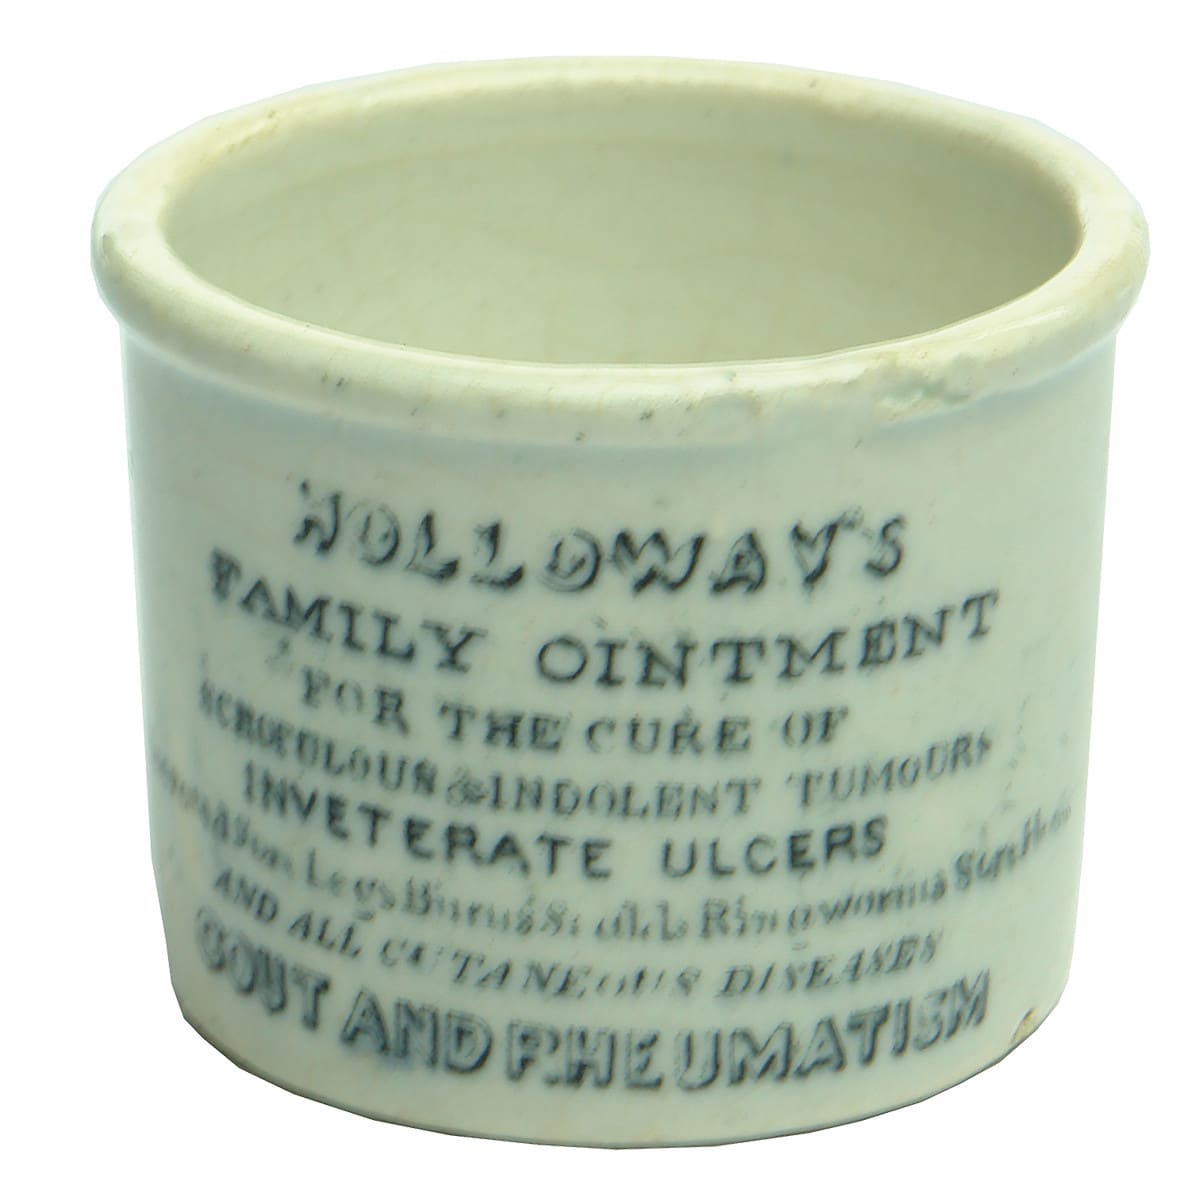 Ointment Pot. Holloway's Family Ointment. Strand, London.